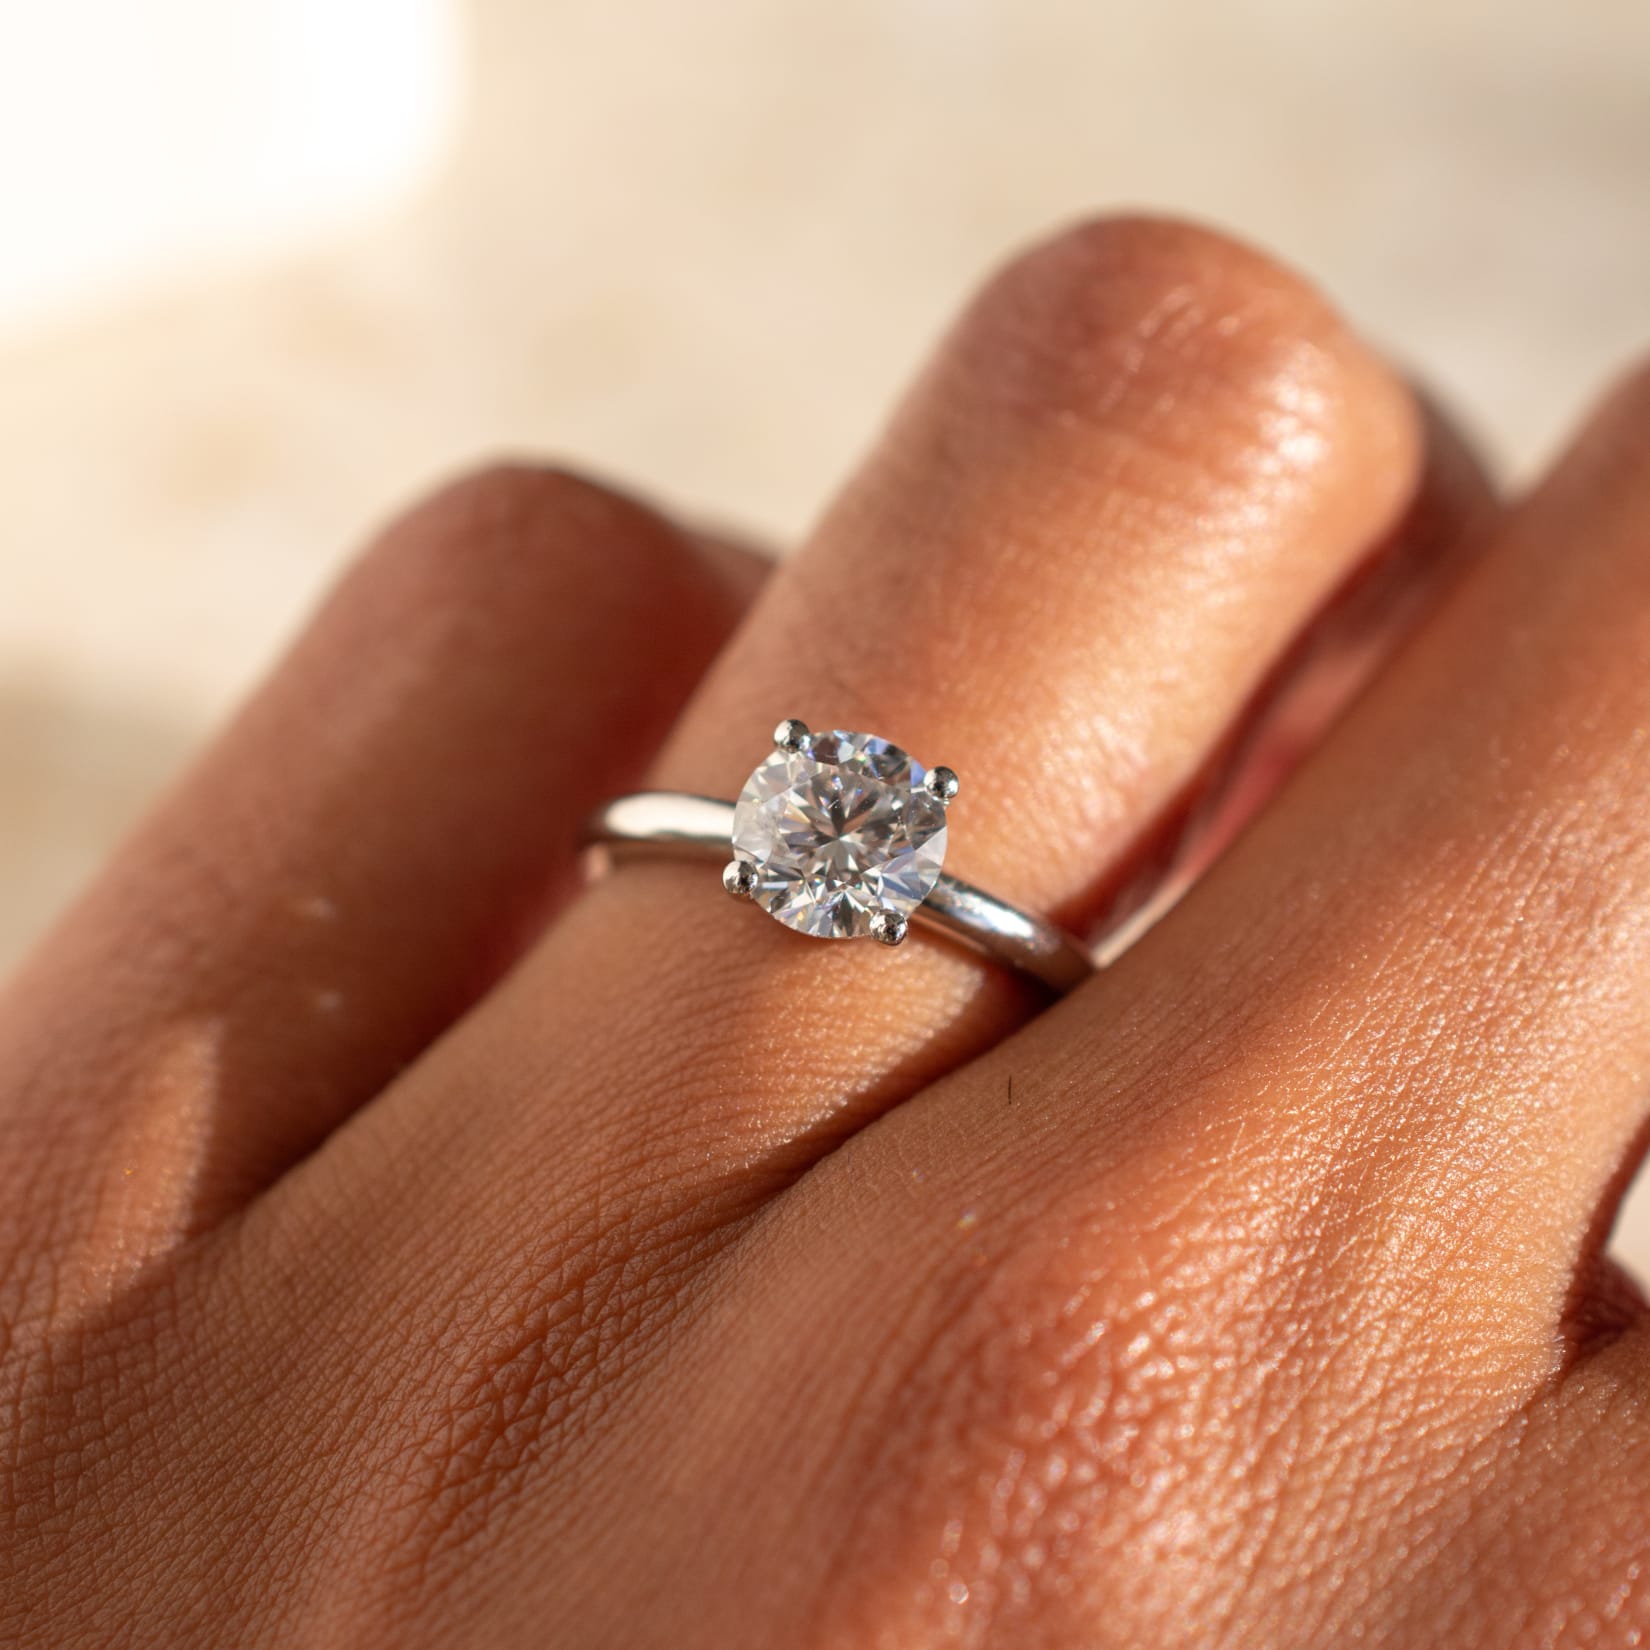 How to buy the best solitaire engagement rings Cover Photo